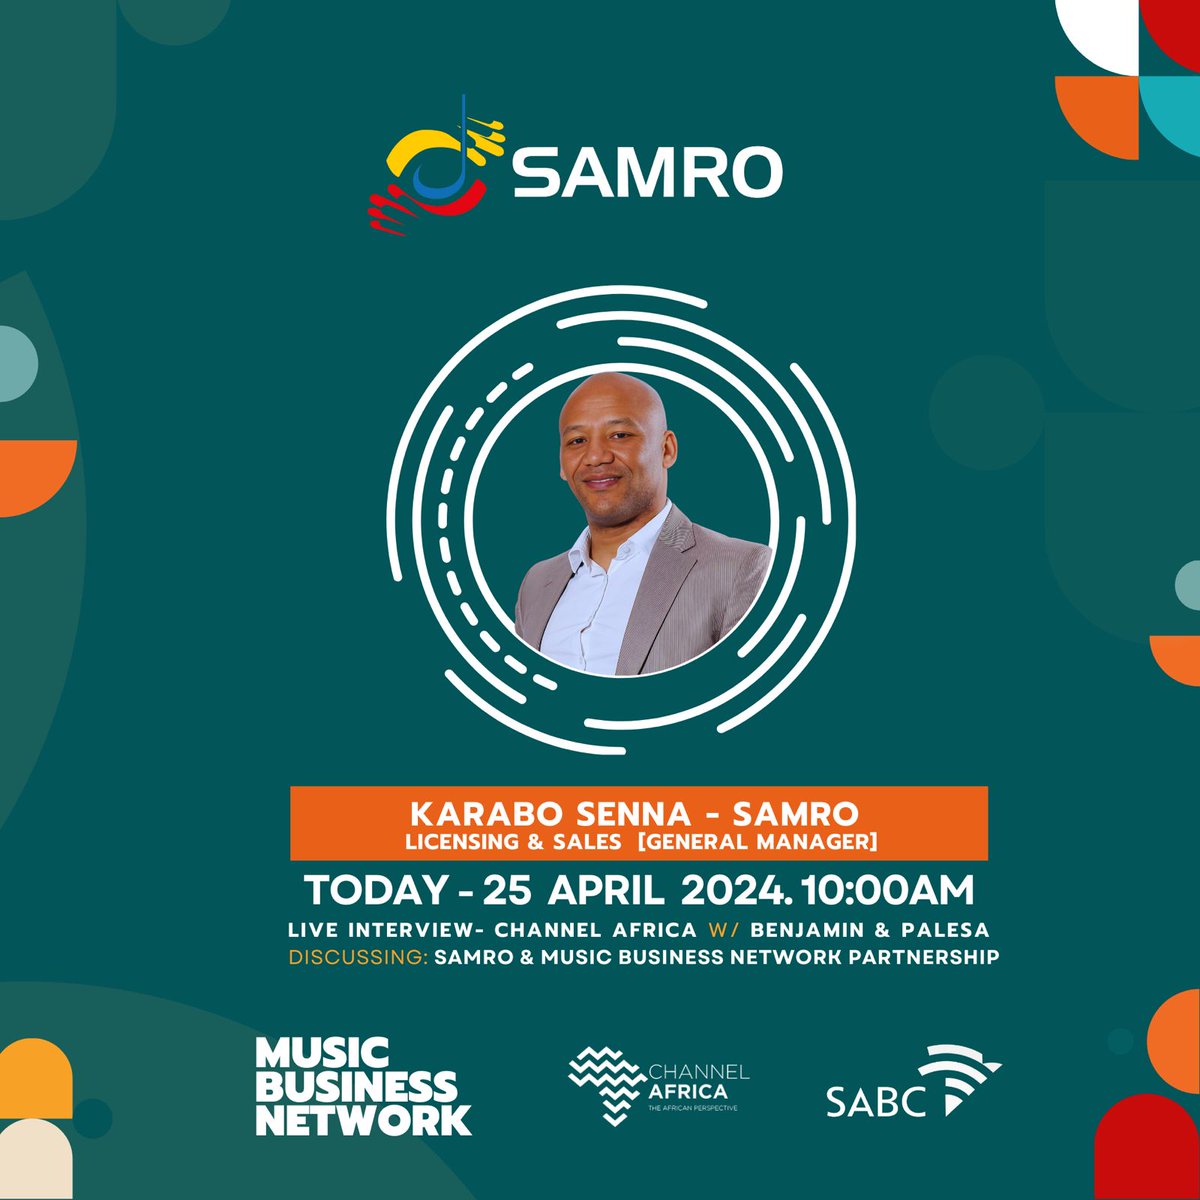 Catch SAMRO's GM of Sales and Licensing, Karabo Senna this morning at 10h00 on Channel Africa discussing the partnership between SAMRO and the Music Business Academy. #SAMRO #MusicBusinessAcademy #MusicBusiness